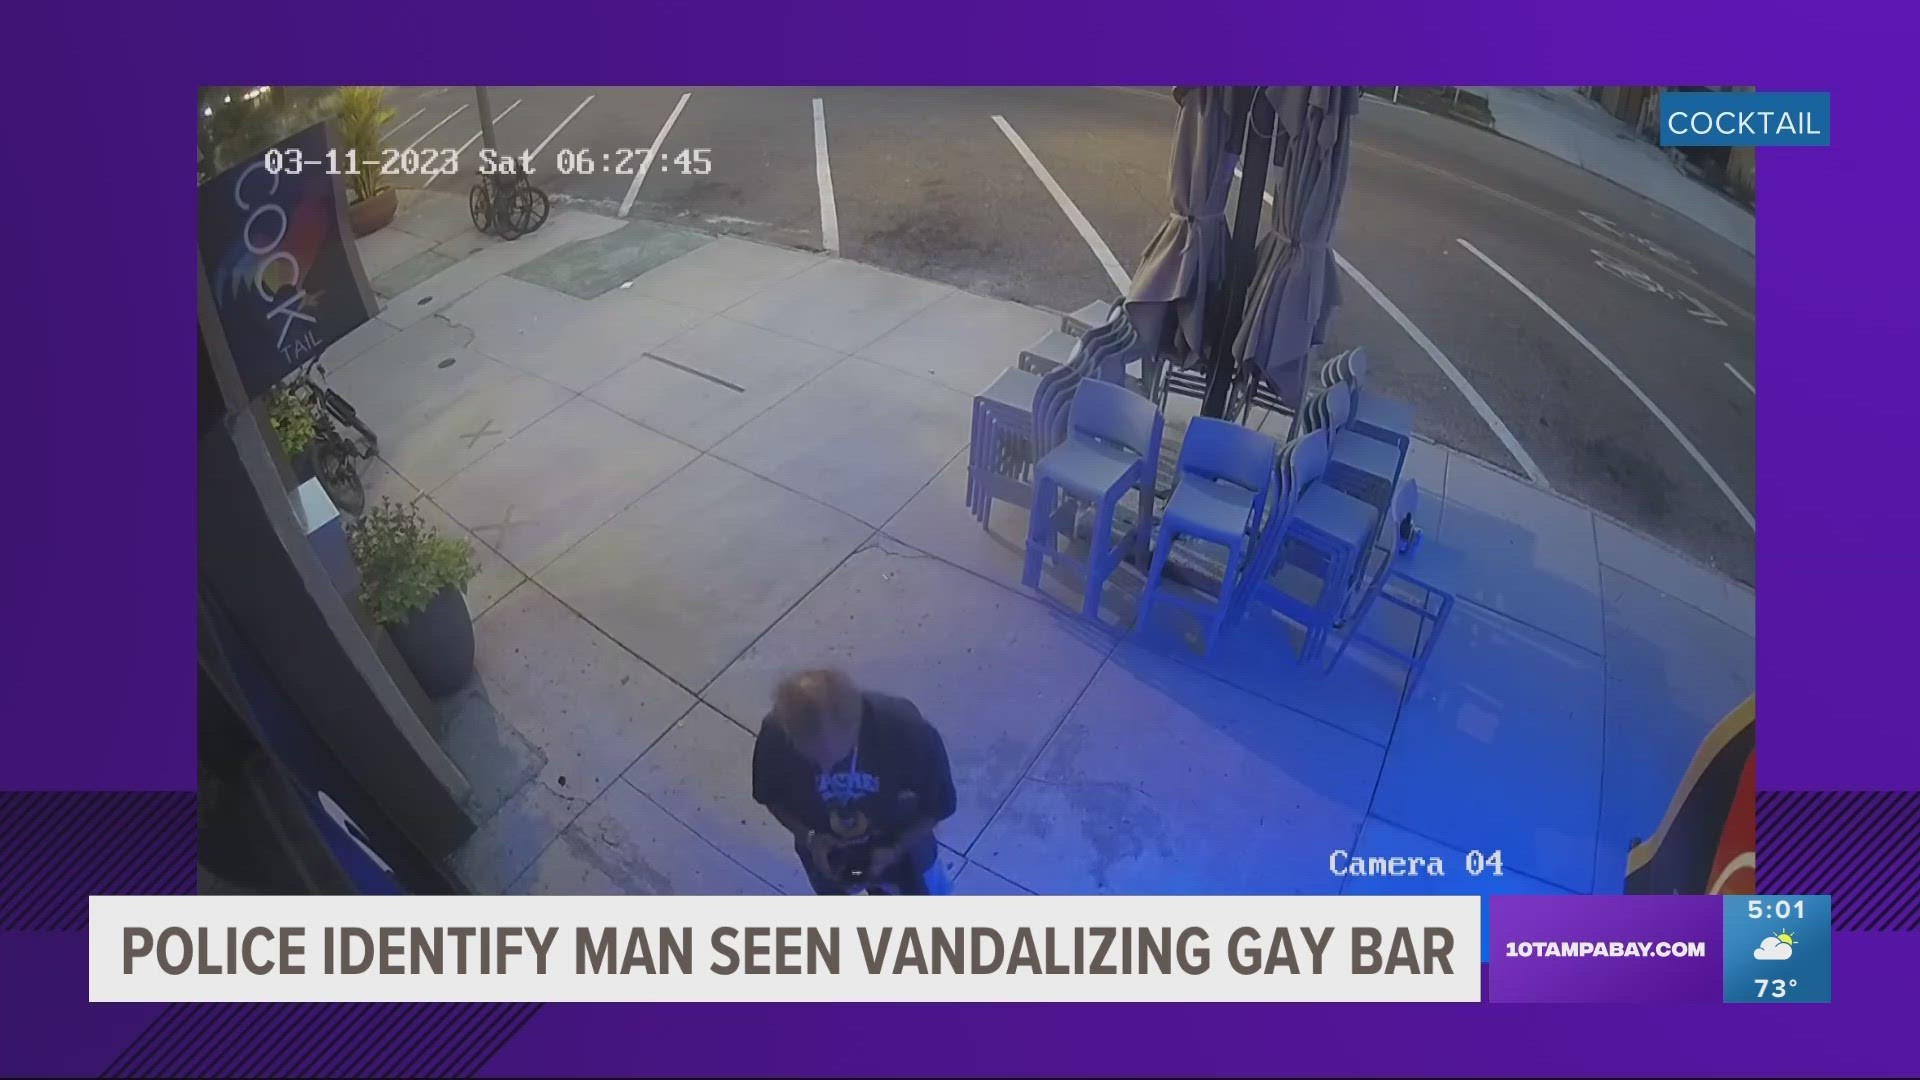 A homophobic slur was written on the window at Cocktail on Central Avenue.